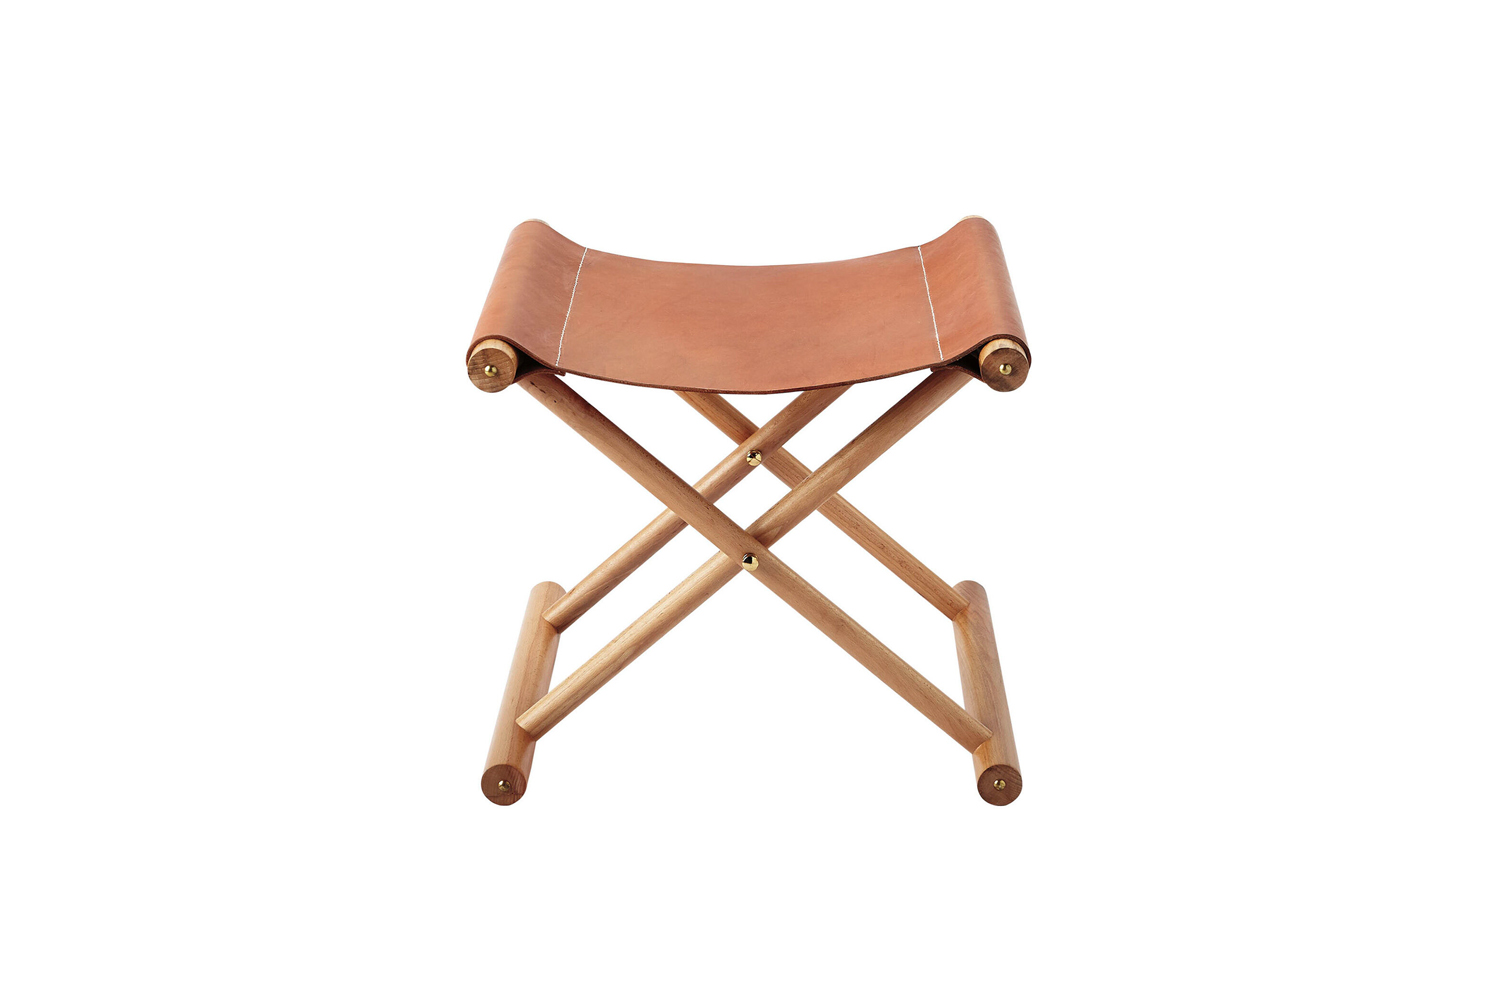 another luxe option, the cooper leather stool is \$698 at serena & lily. 12